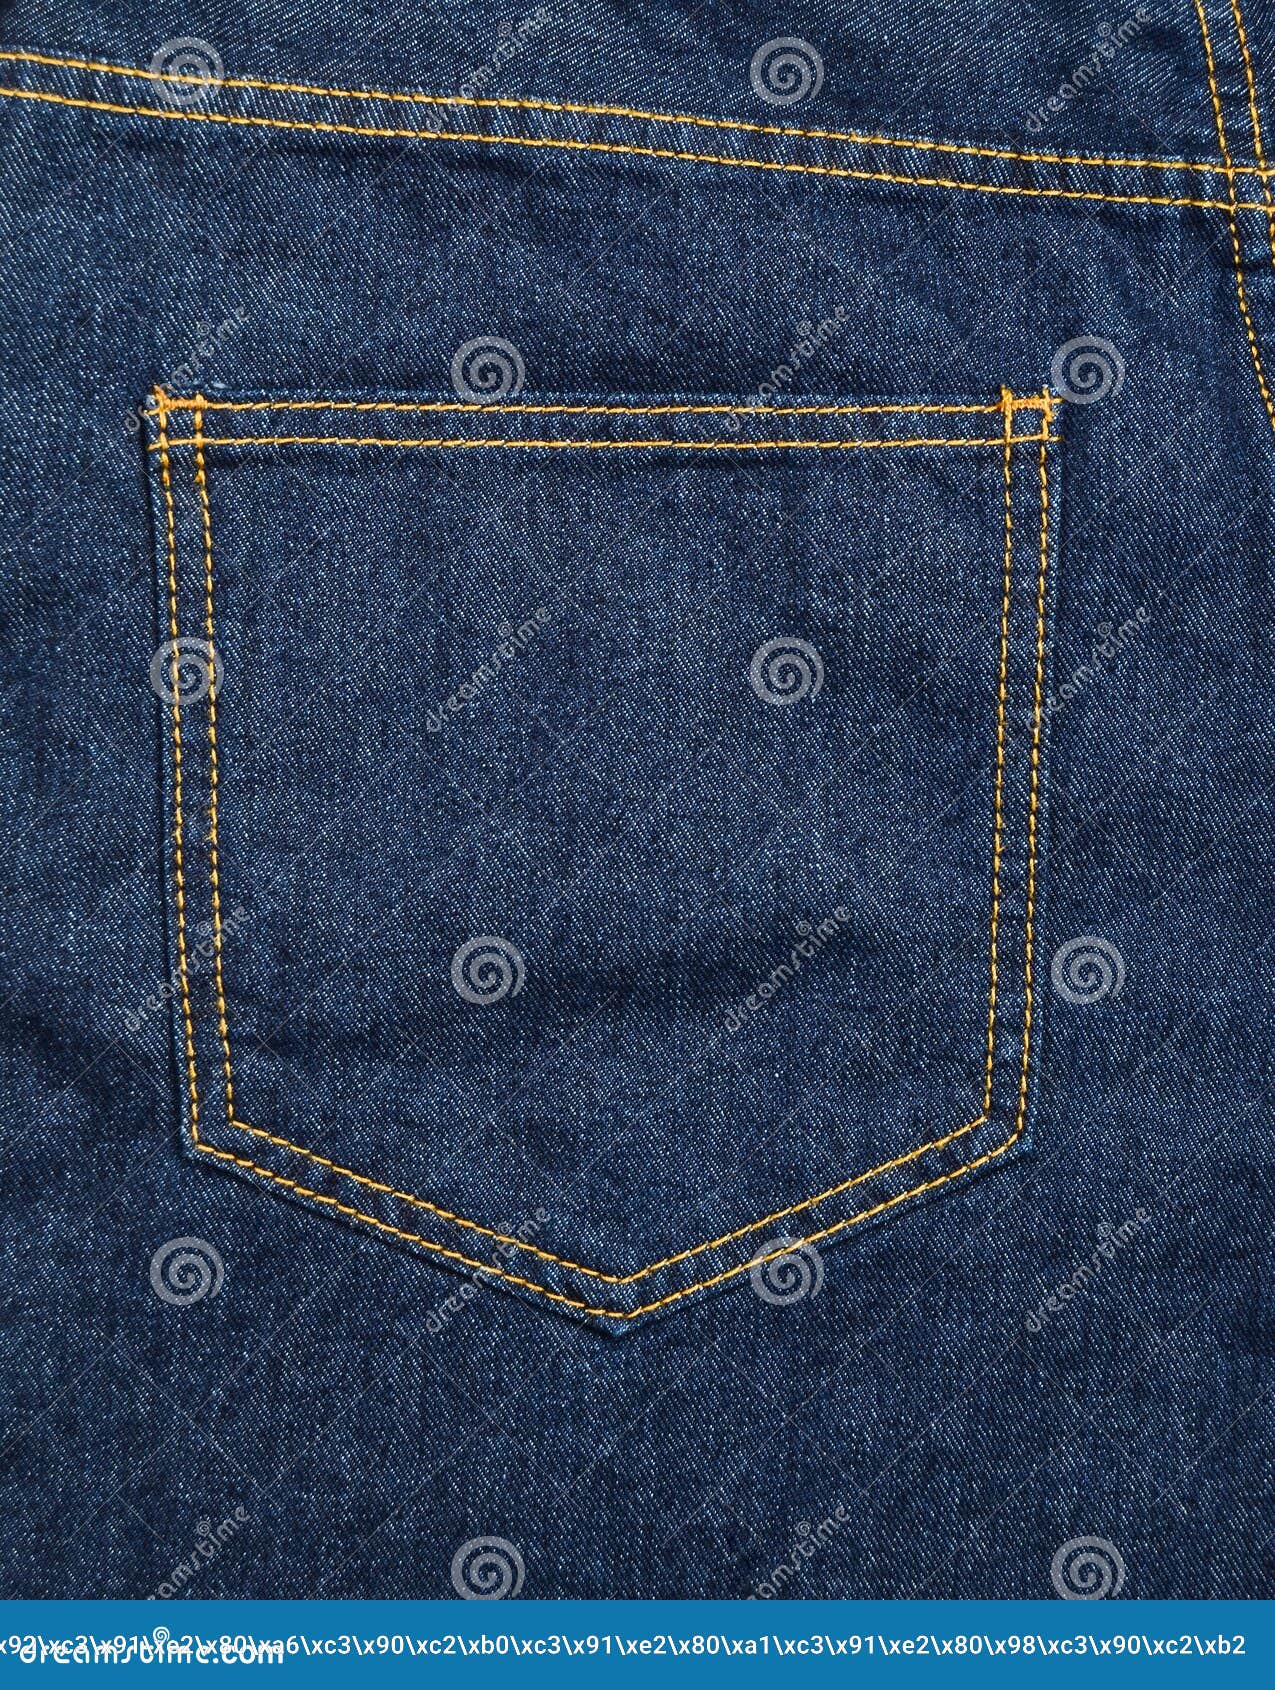 Denim Texture. Back Pocket of the Jeans Stock Photo - Image of textile ...